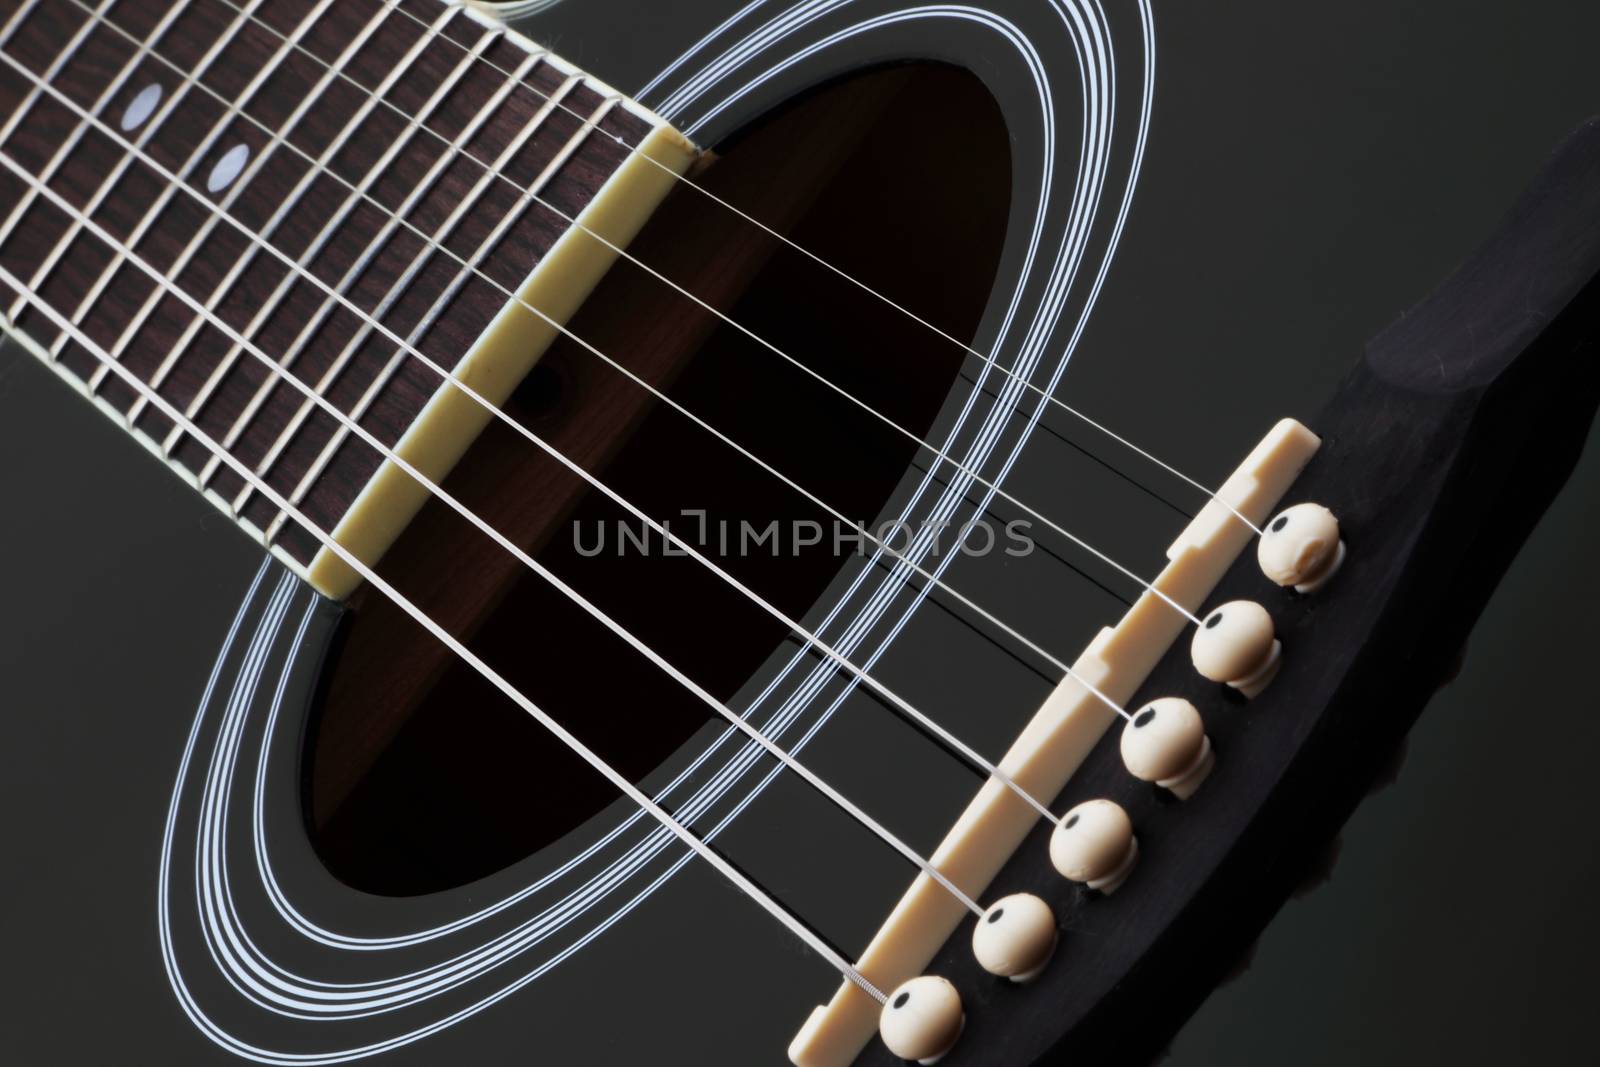 A guitar sound hole bridge and neck with selective focus